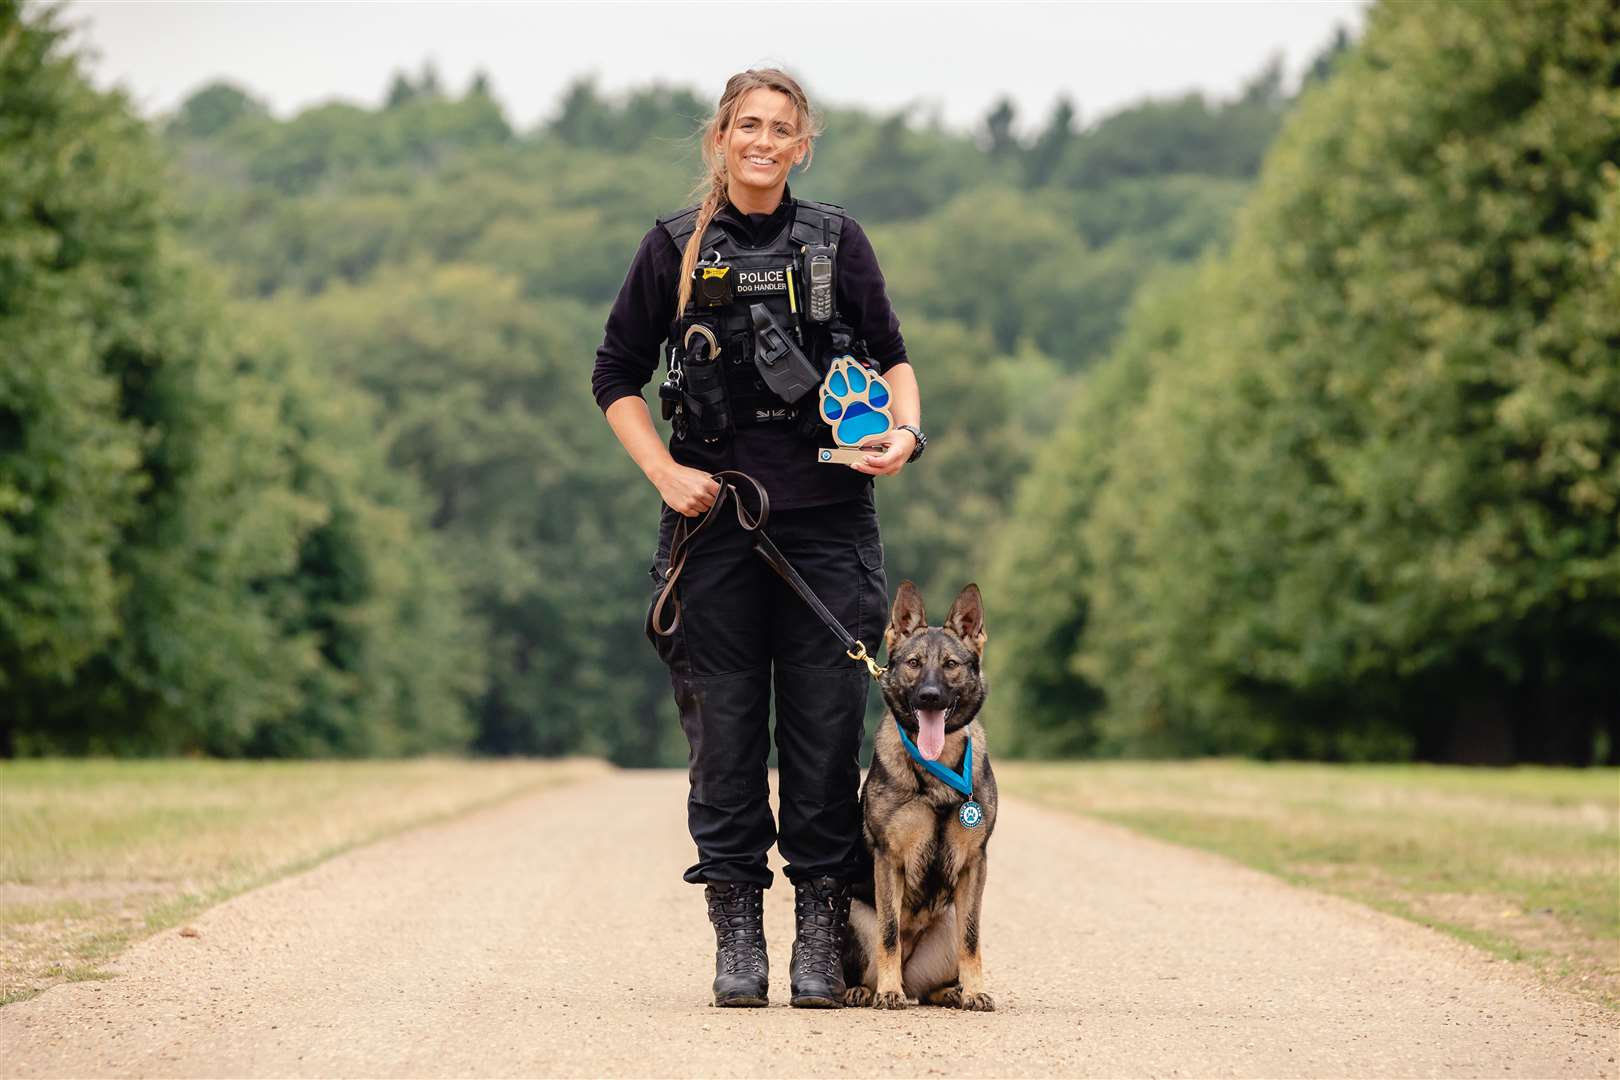 PC Megan West and German Shepherd PD Calli with their award for saving a man's life